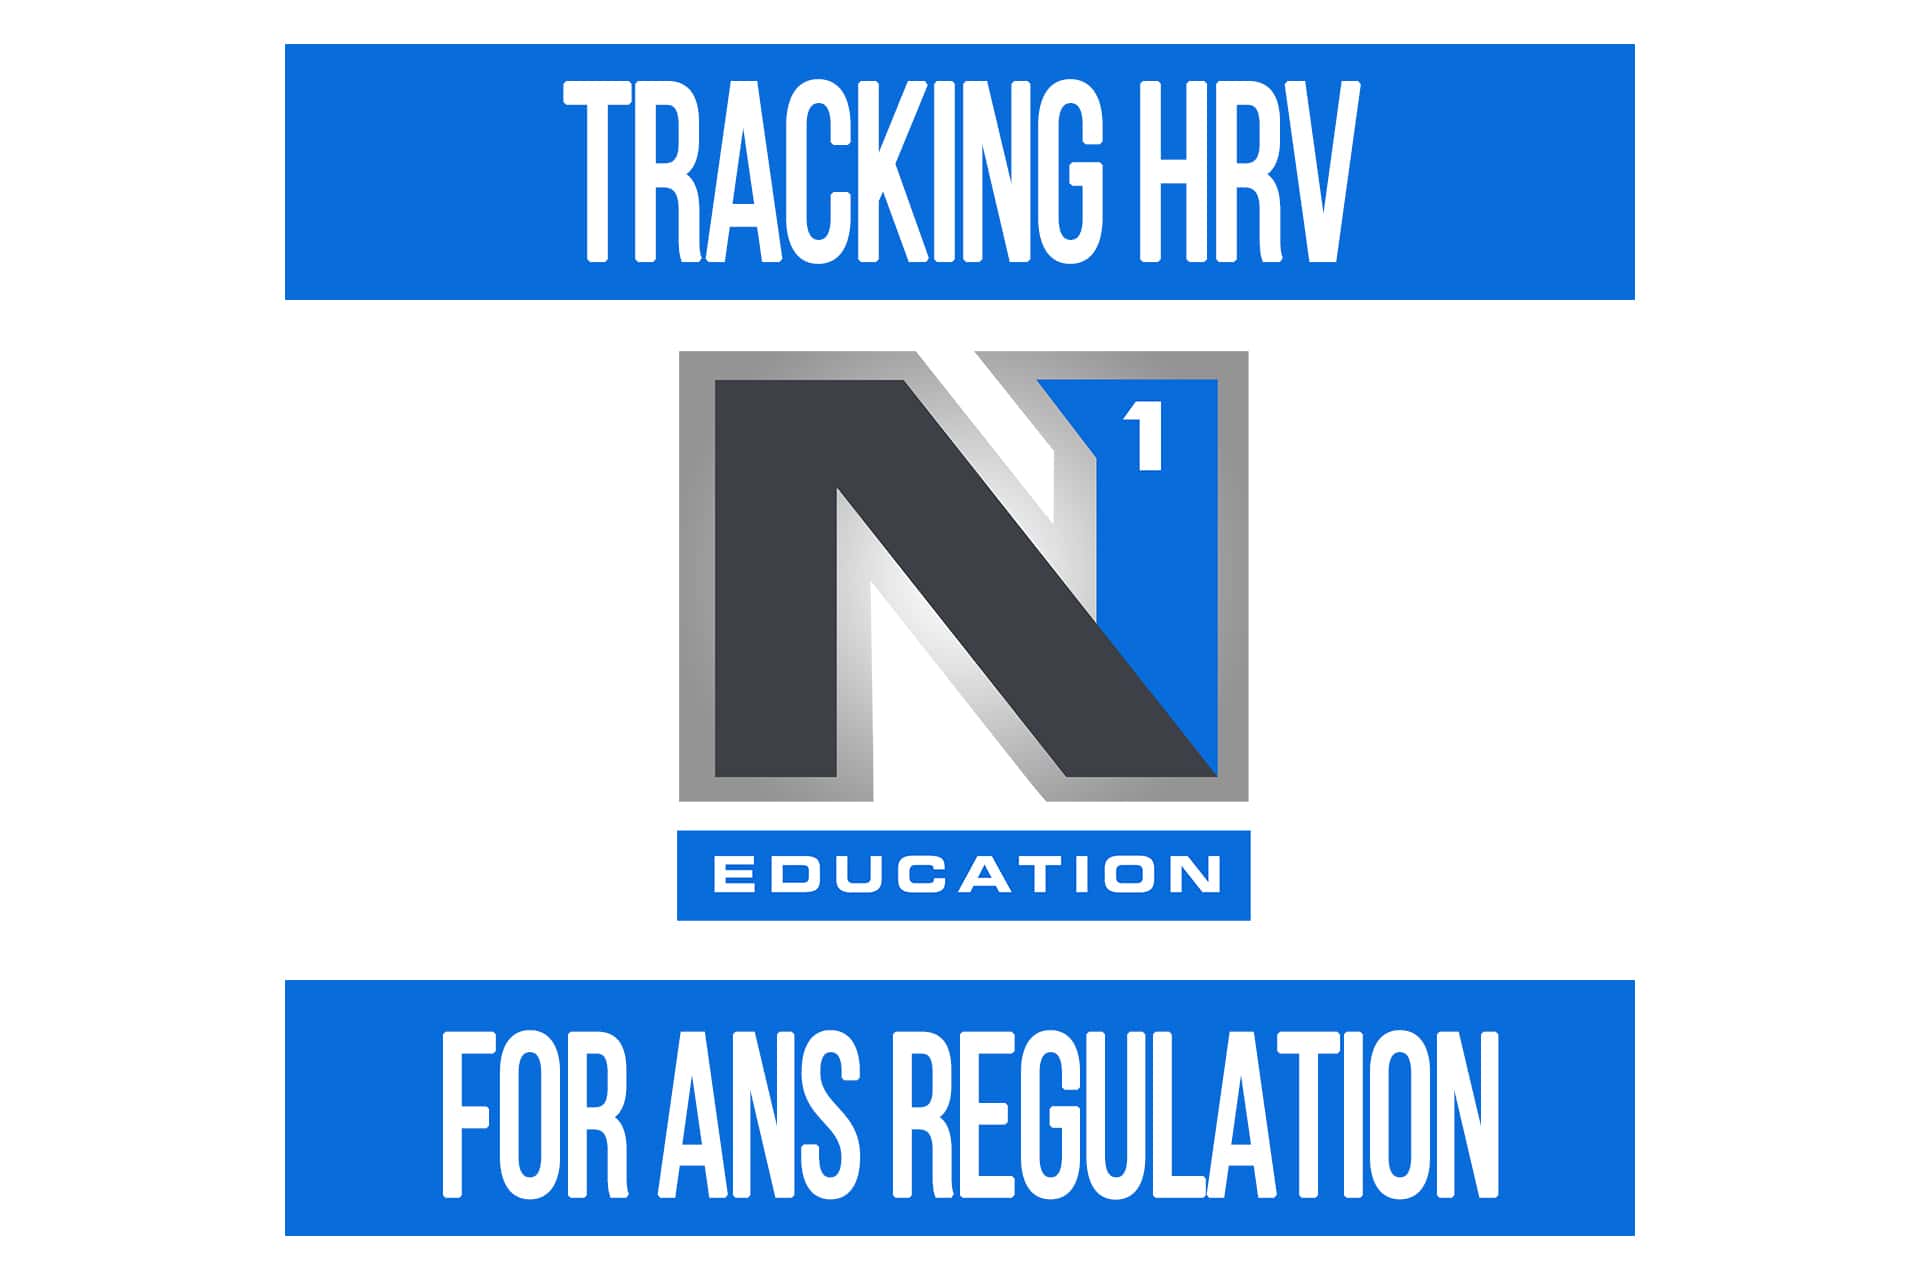 Opinion on HRV for Tracking ANS Regulation